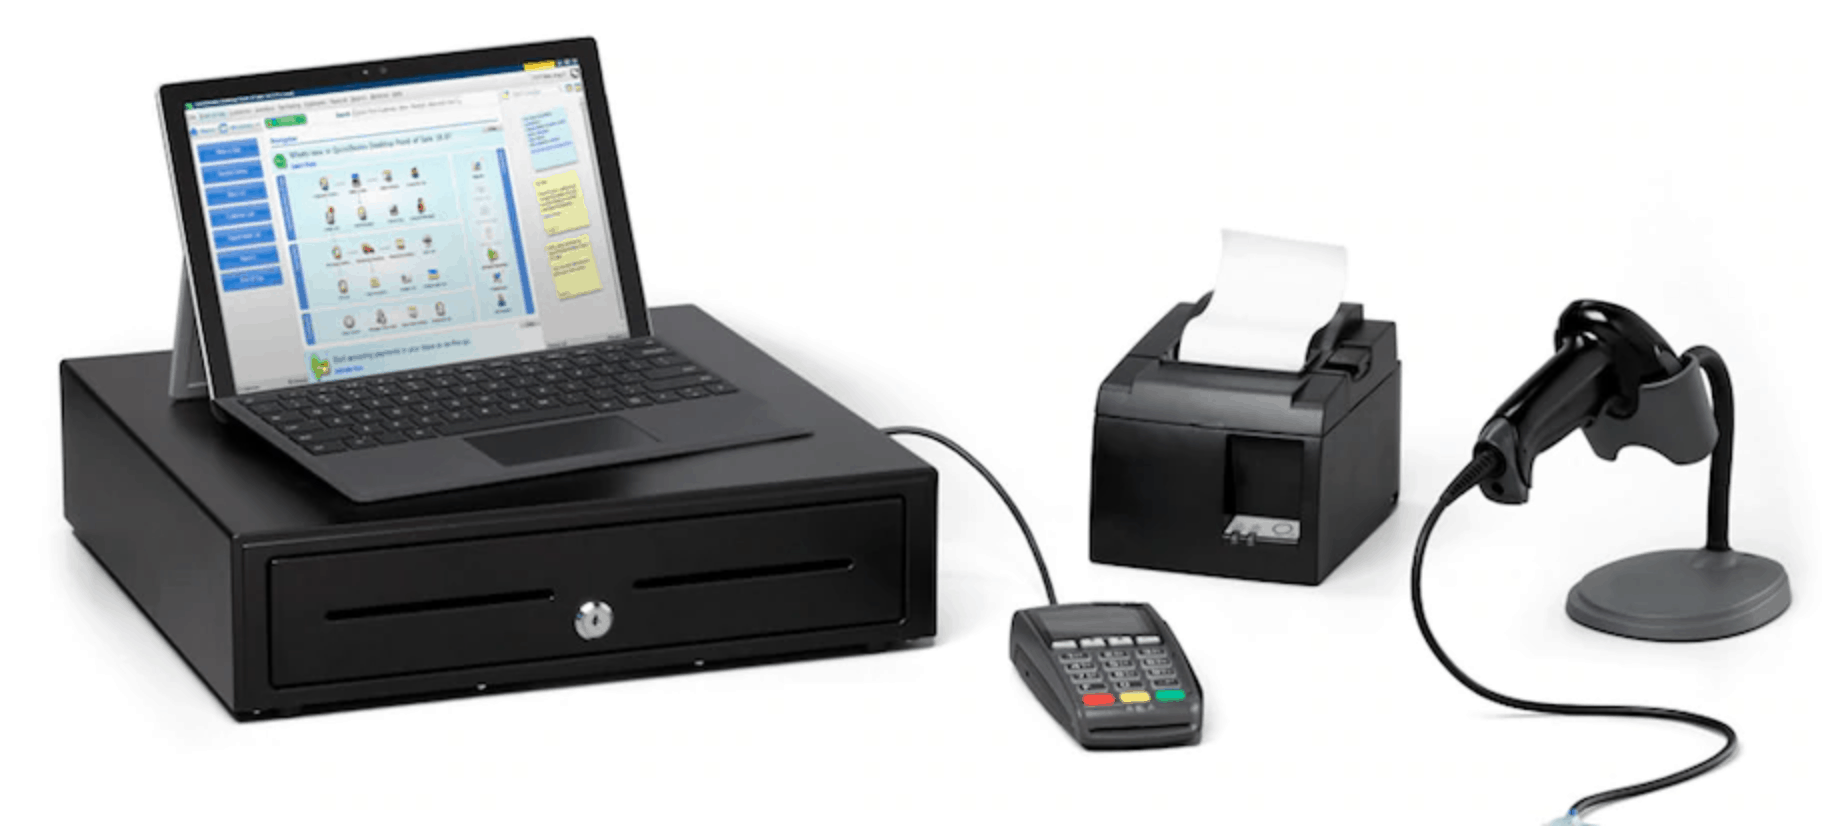 quickbooks desktop point of sale hardware with surface pro